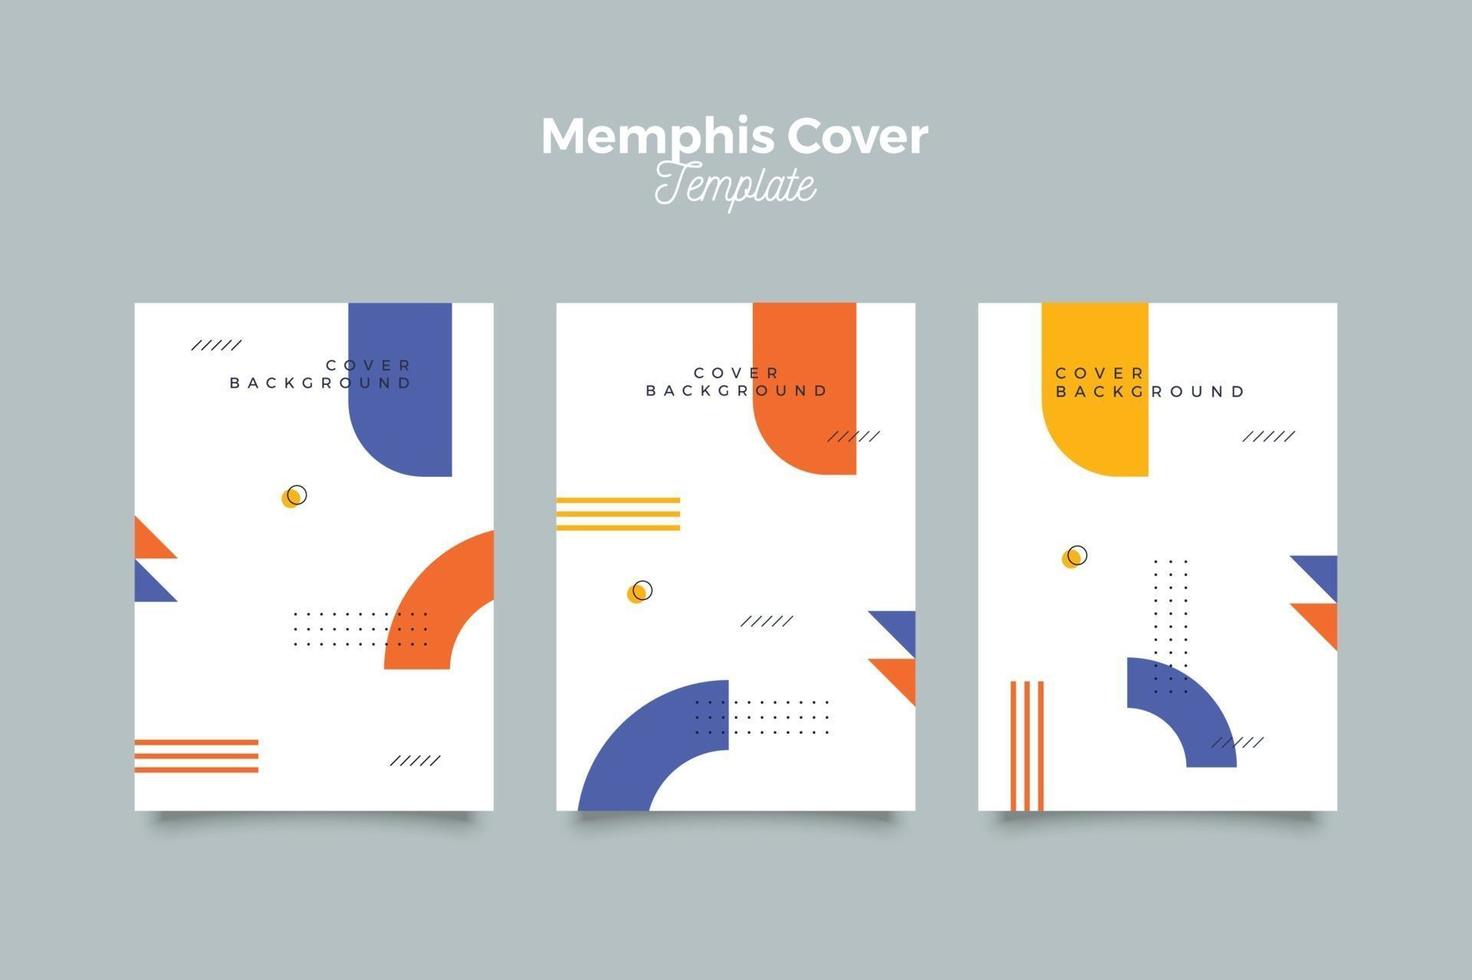 Collection of sales coovers in memphis style vector